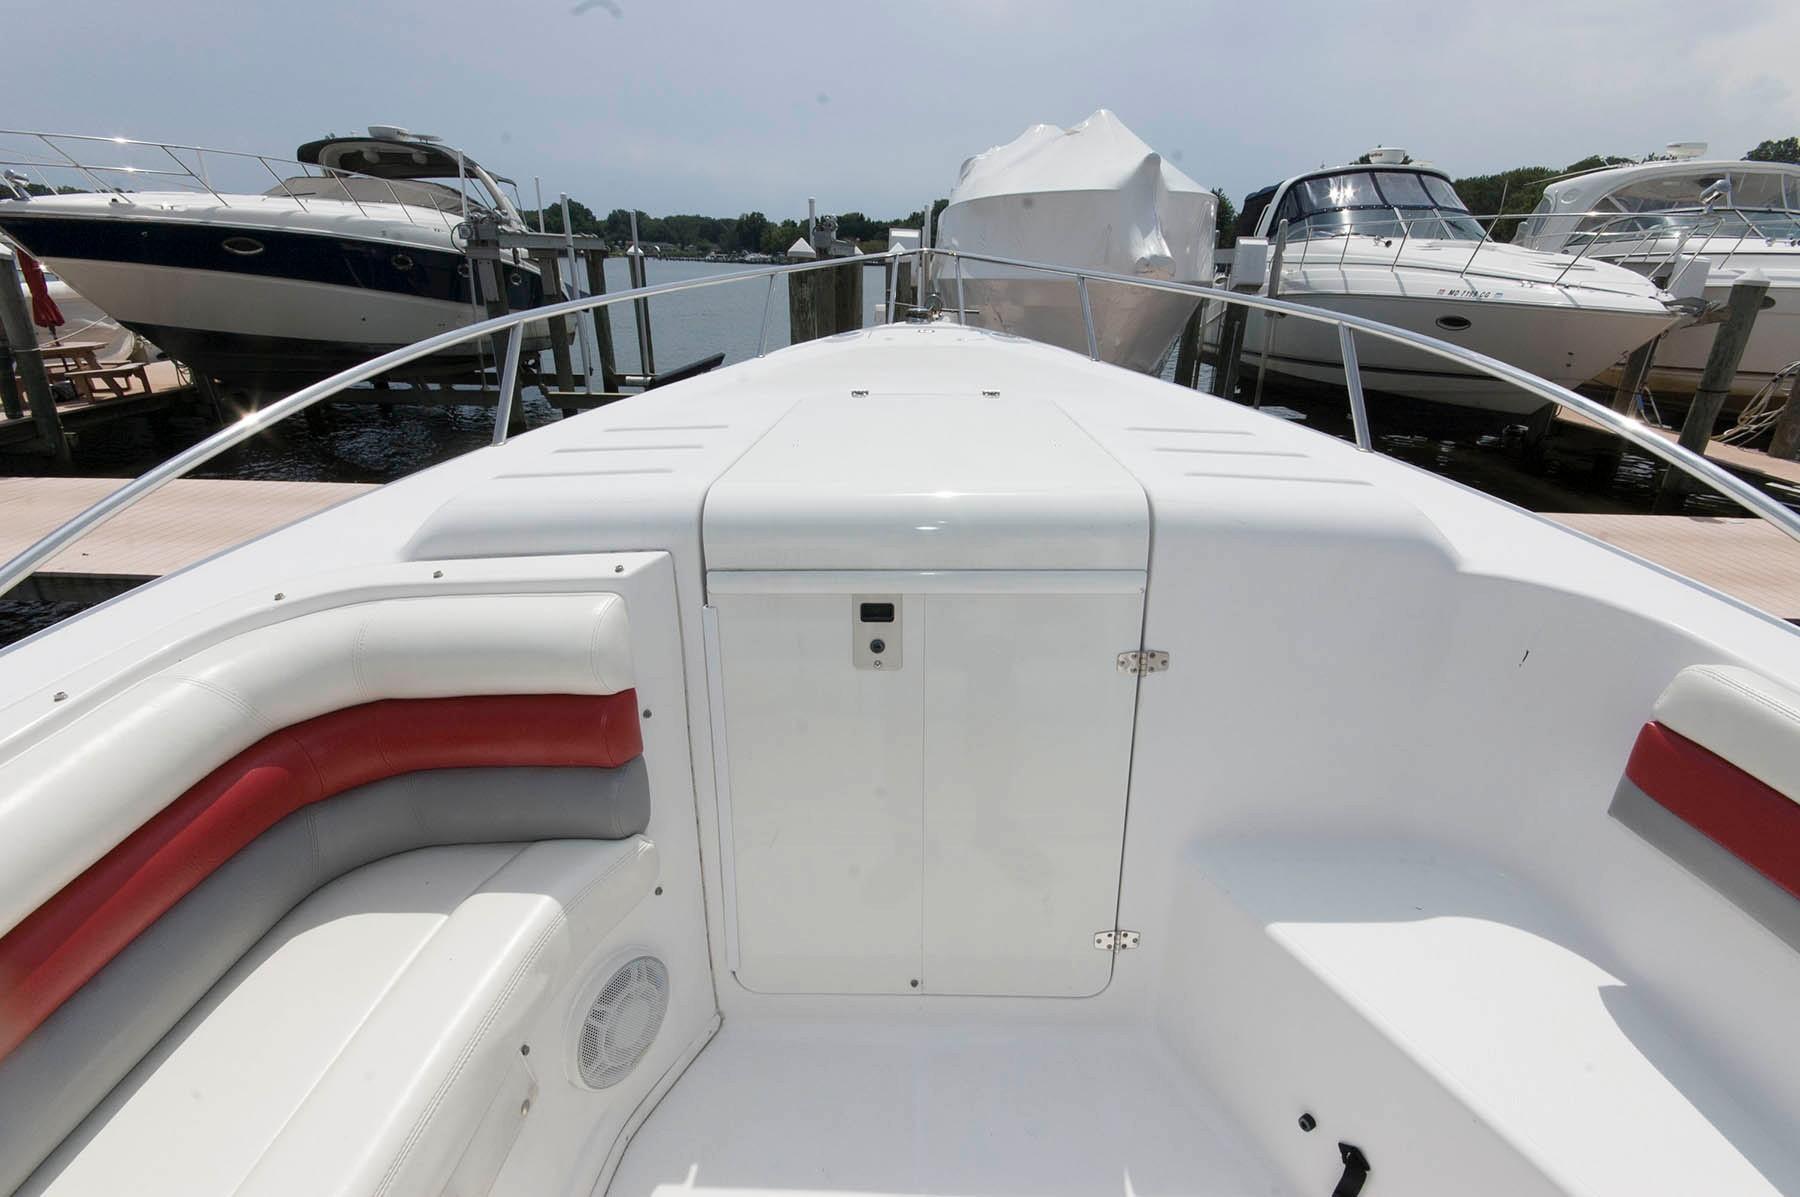 M 6727 RD Knot 10 Yacht Sales